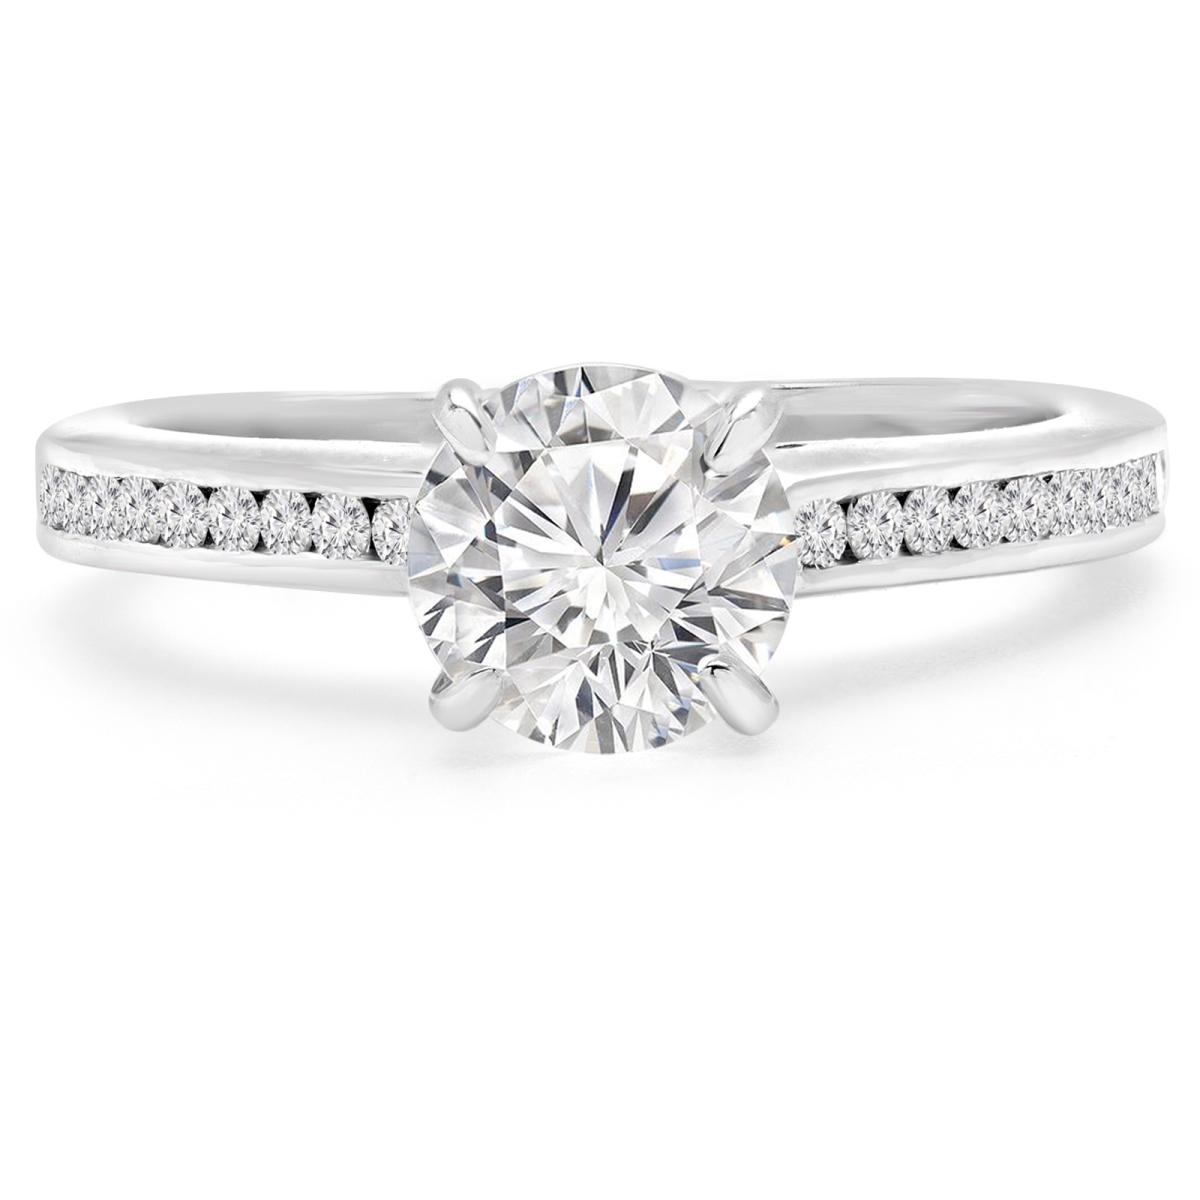 1.25 CTW Round Diamond Solitaire Engagement Ring with Channel Set Accents in 14K White Gold - Size 5.5 -  Great Gems, GR3061037